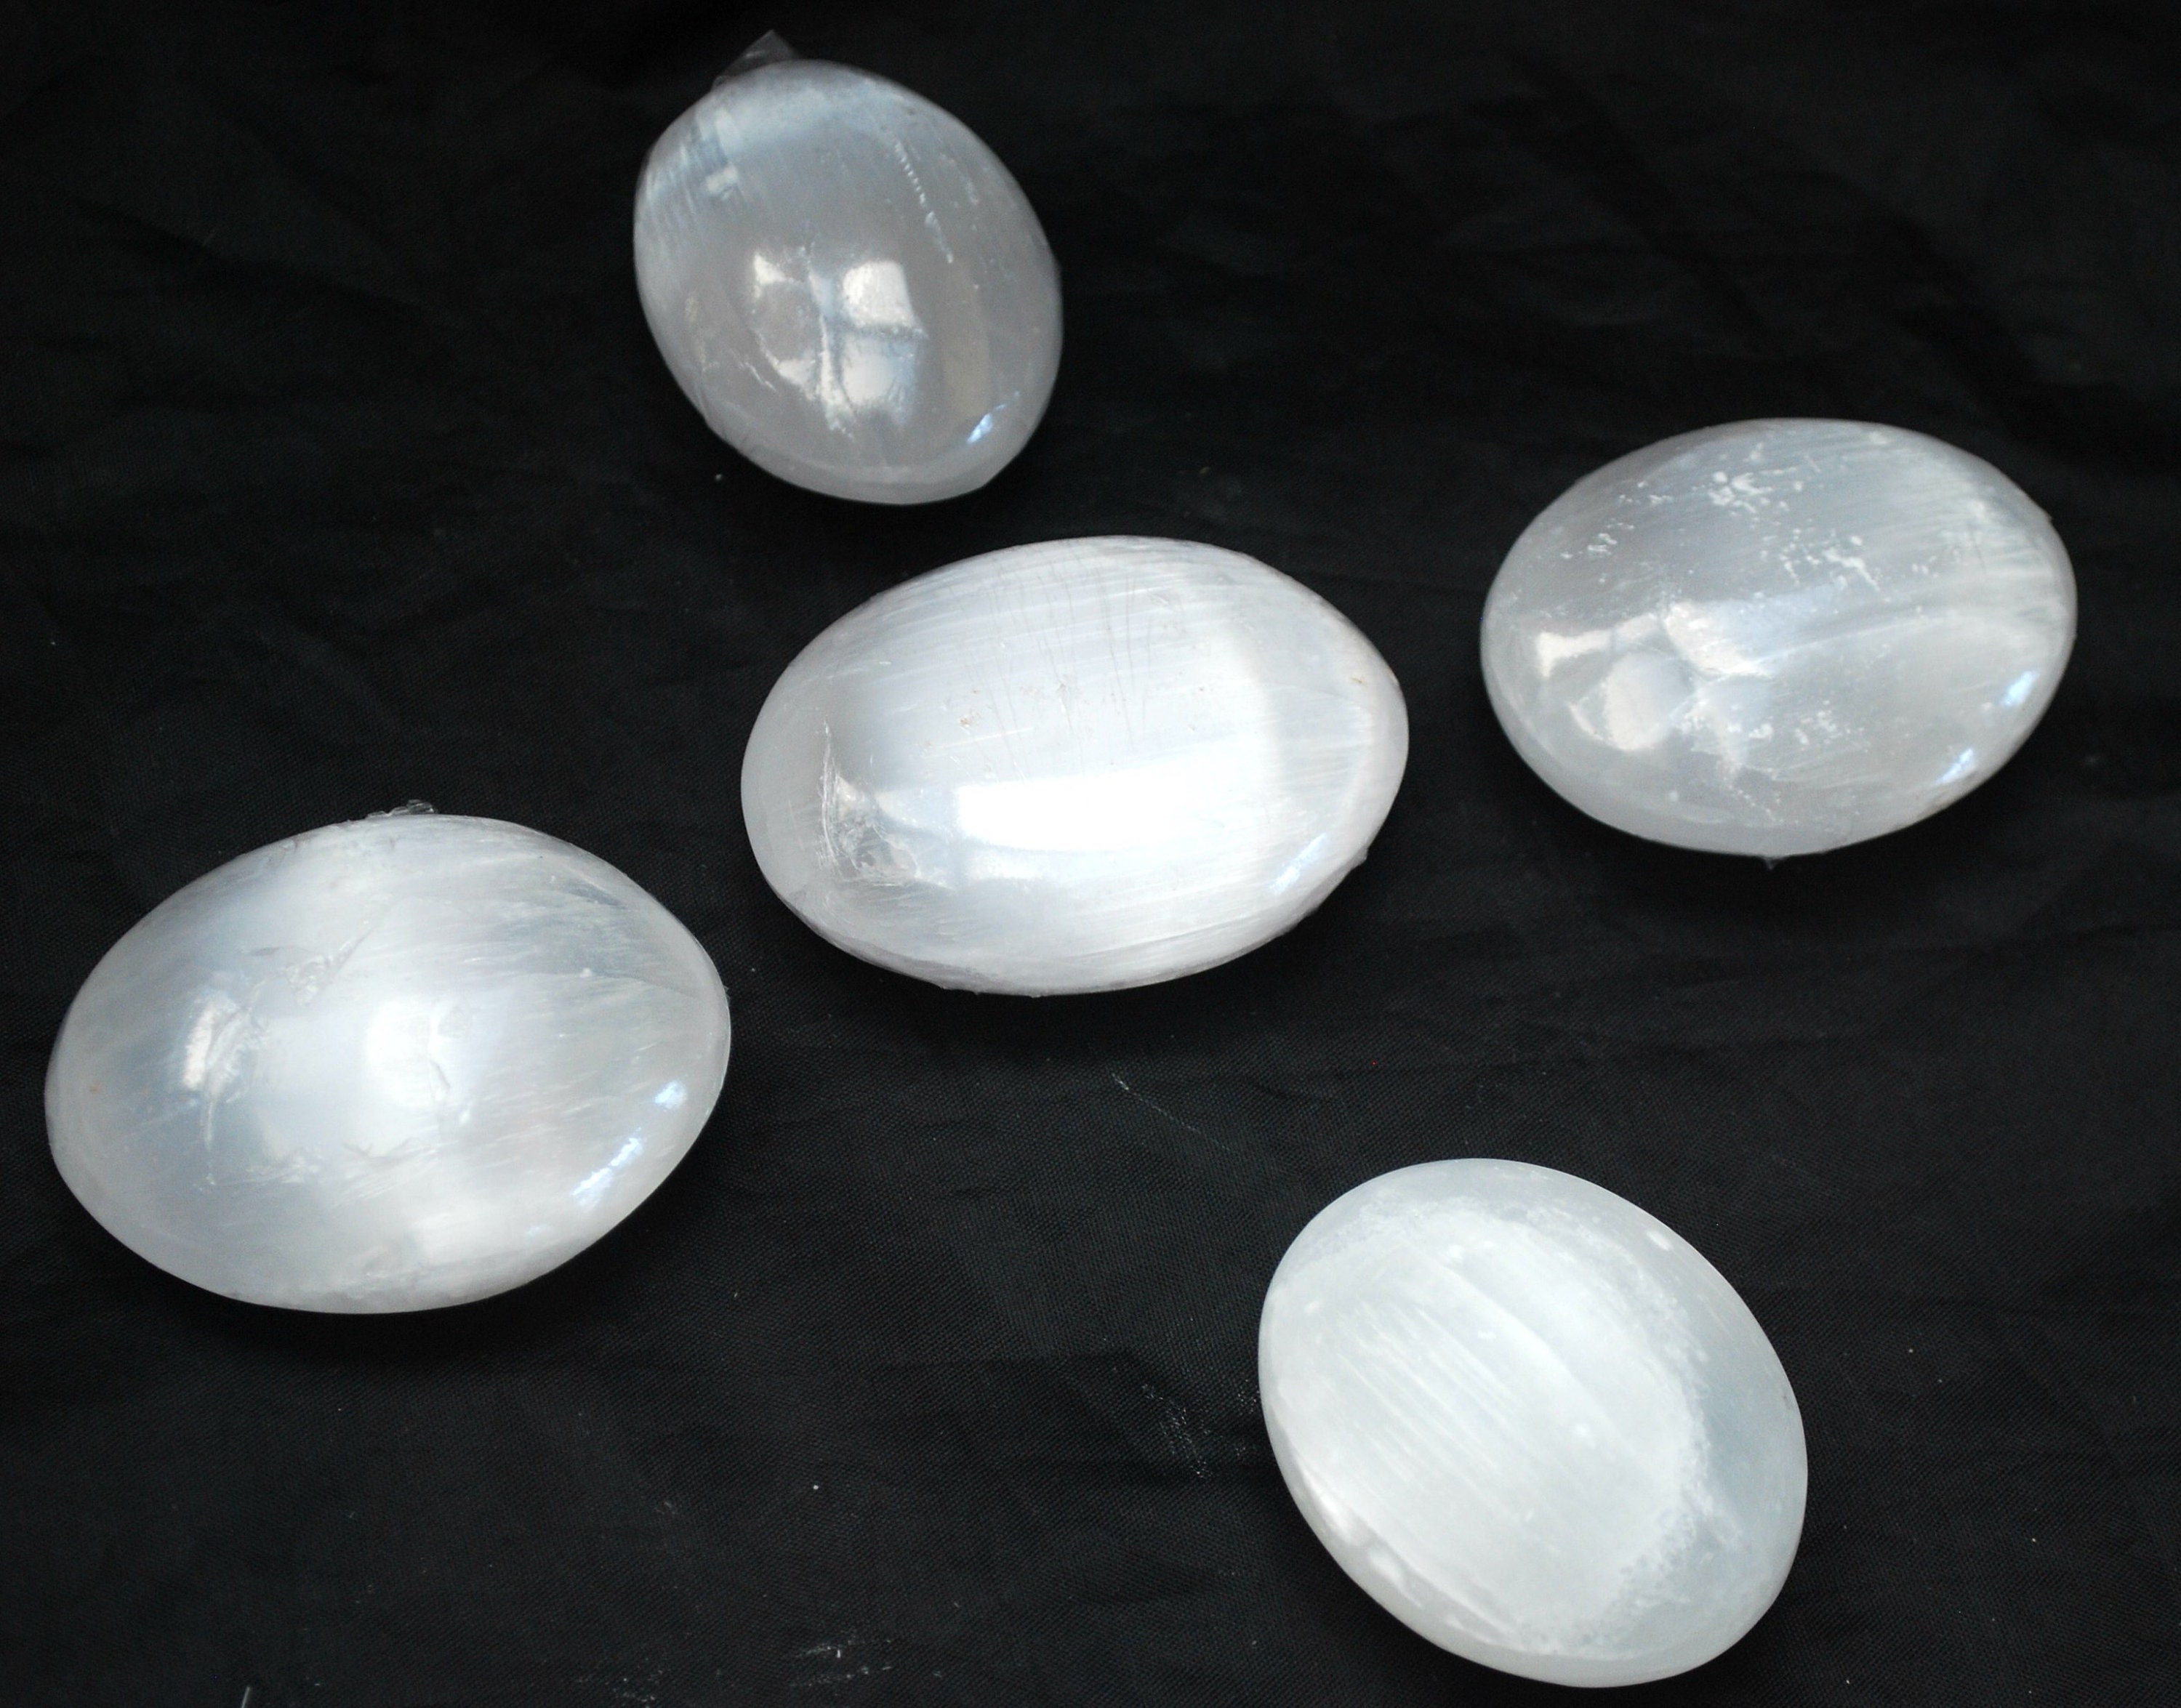 See Wholesale Rates Below CHEAPEST 1 HIGRADE SELENITE PALM STONE 4cm+ £2.50! 